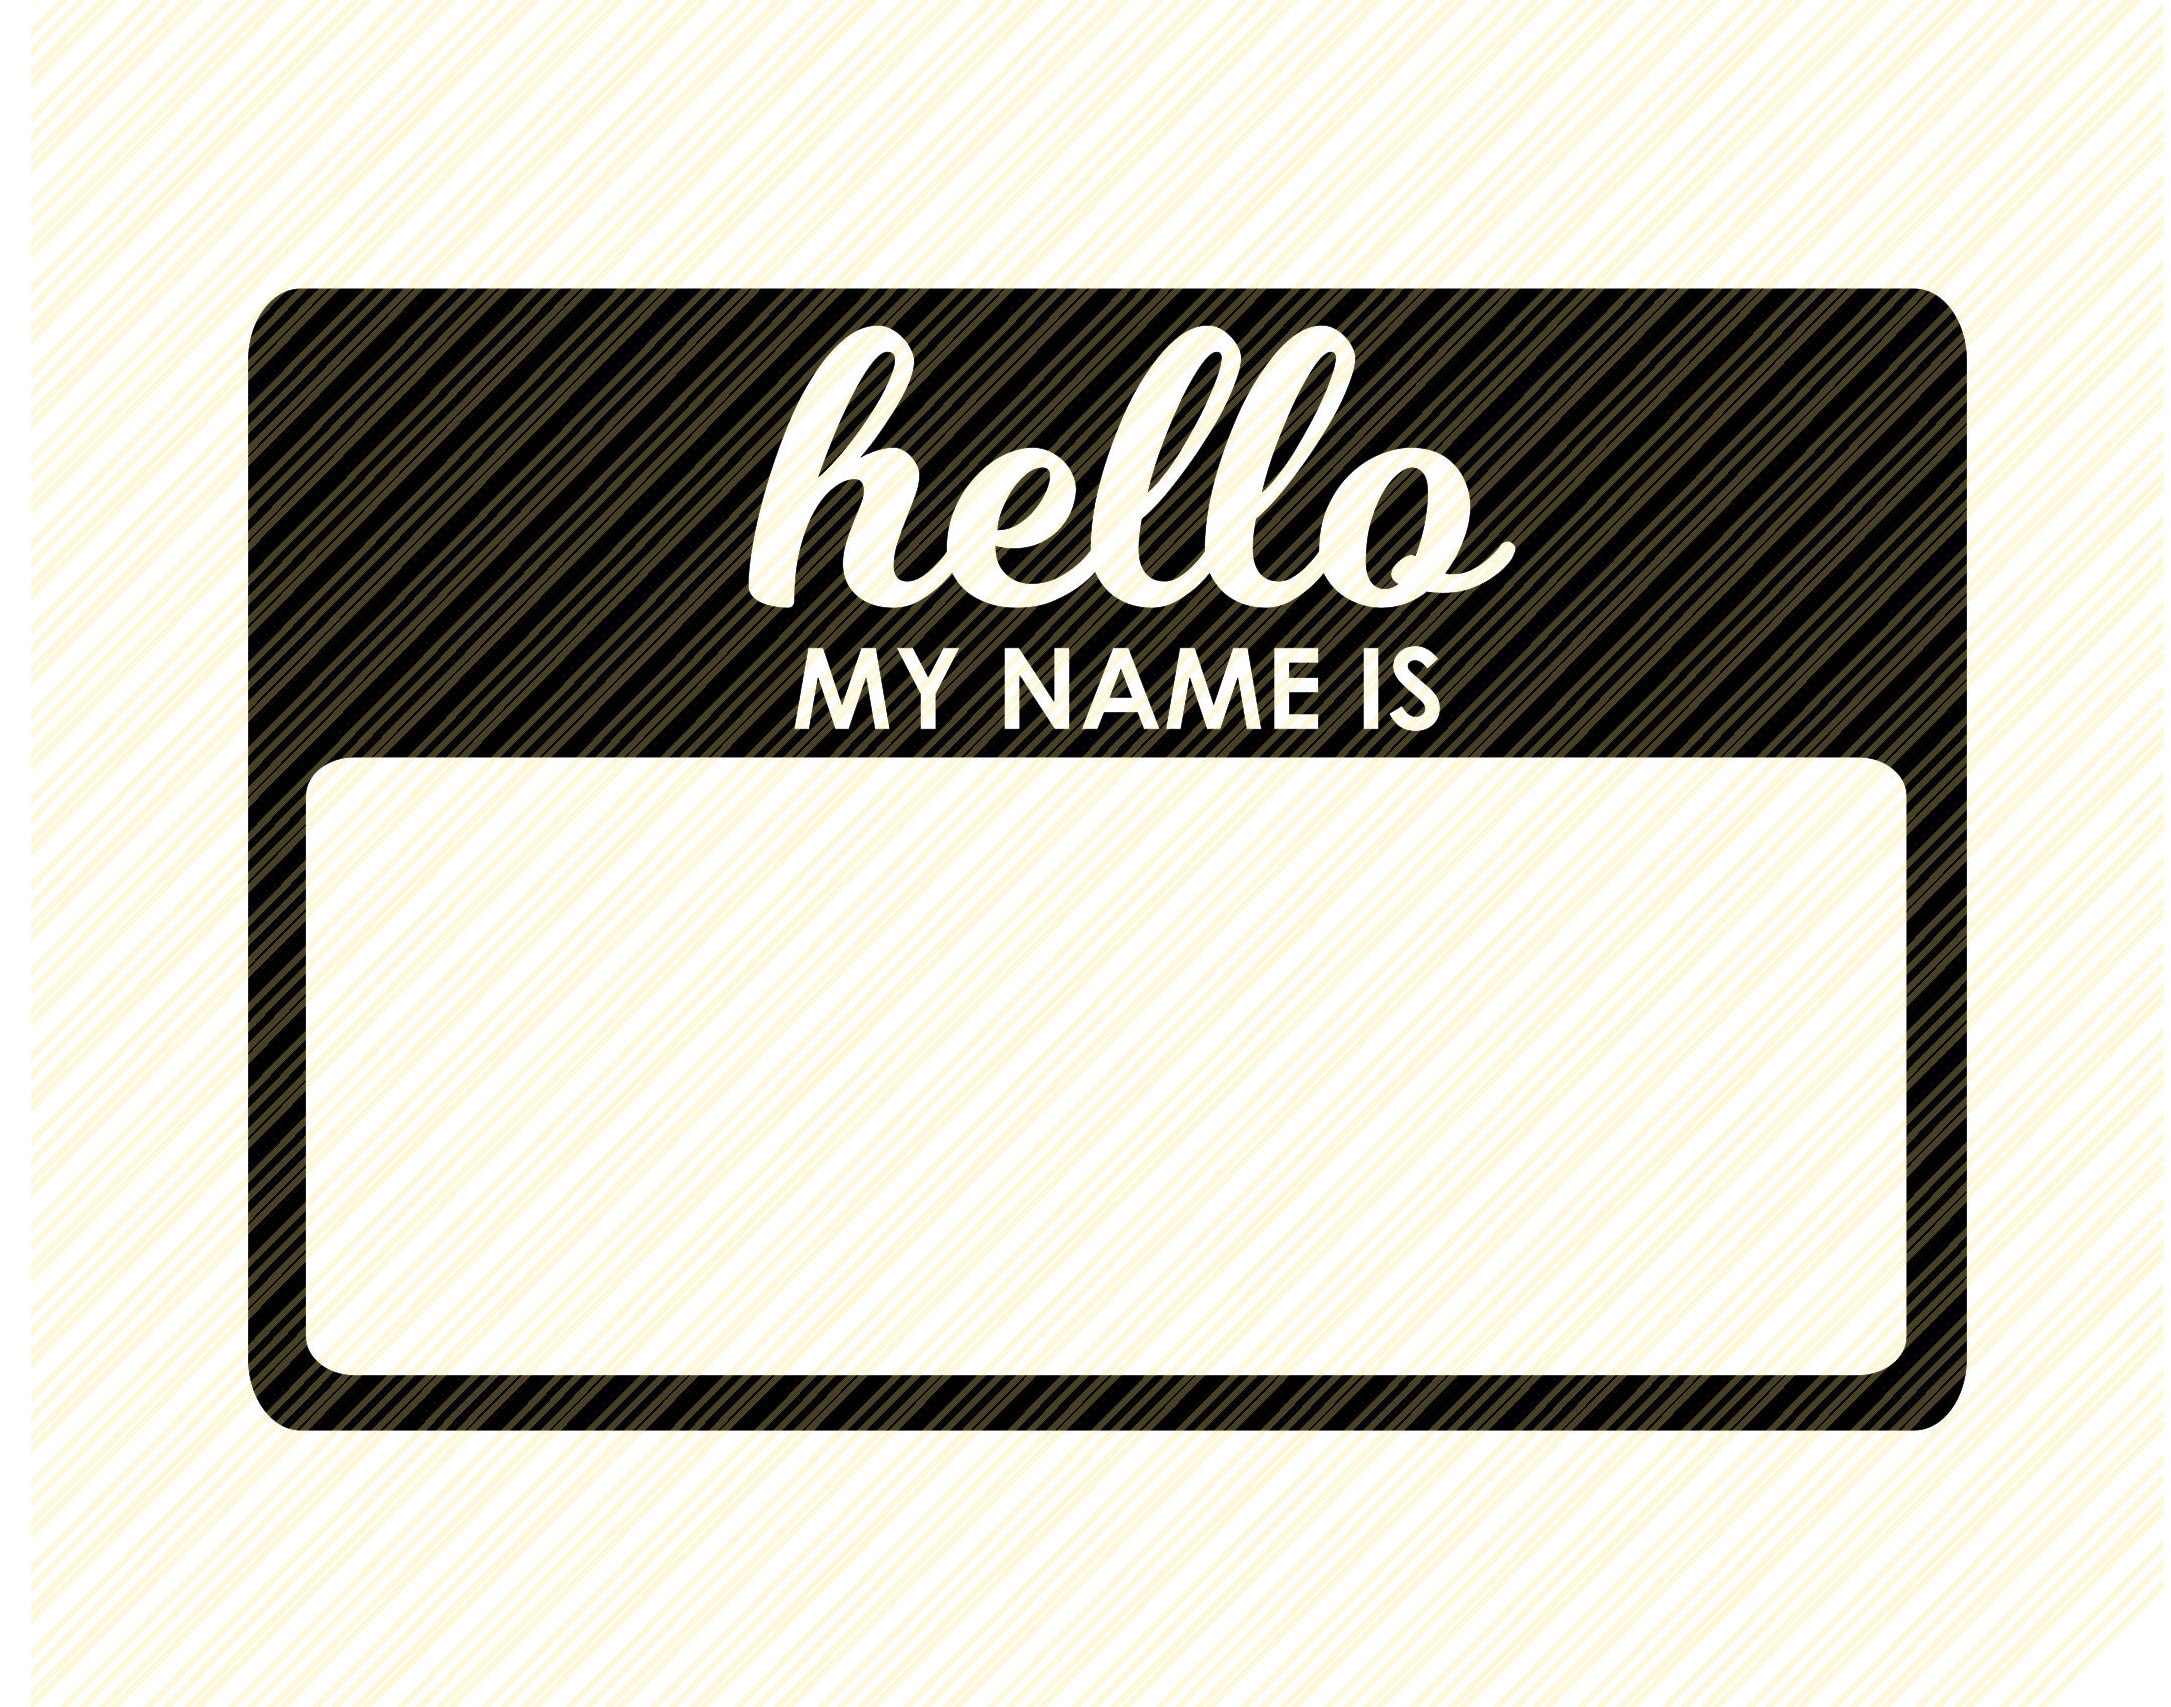 hello-my-name-is-svg-name-tag-svg-vector-image-cut-file-for-etsy